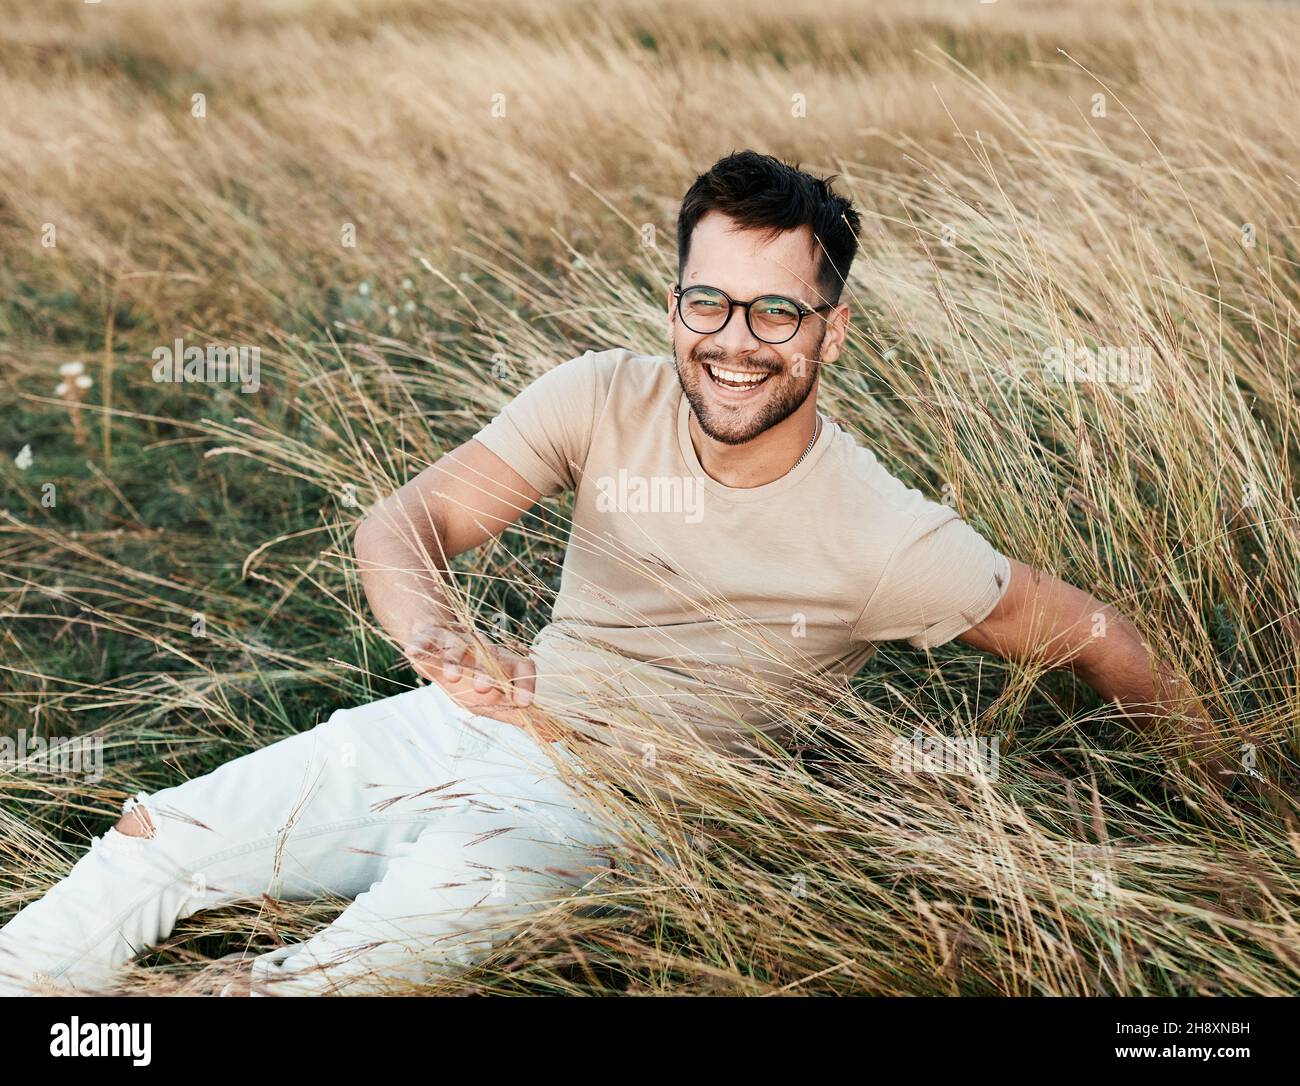 man outdoor portrait adult young male lifestyle guy handsome fashion attractive model casual nature Stock Photo